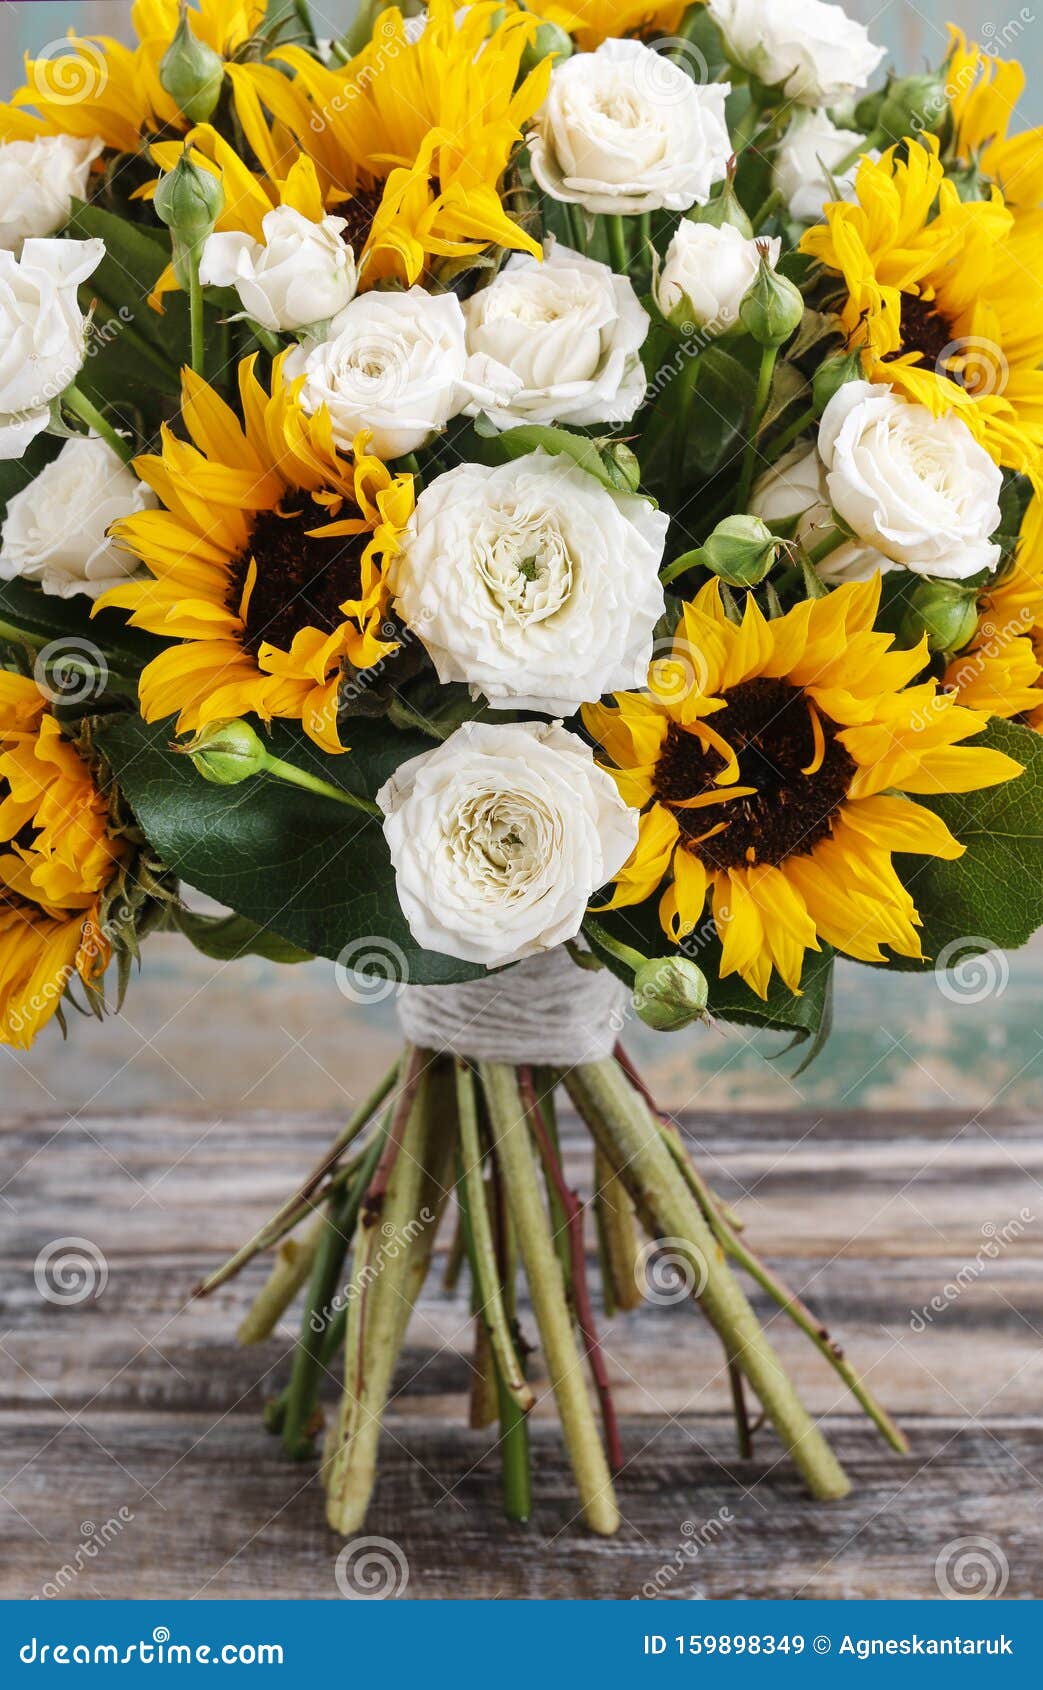 Download Bouquet Of White Roses And Sunflowers Stock Image - Image ...